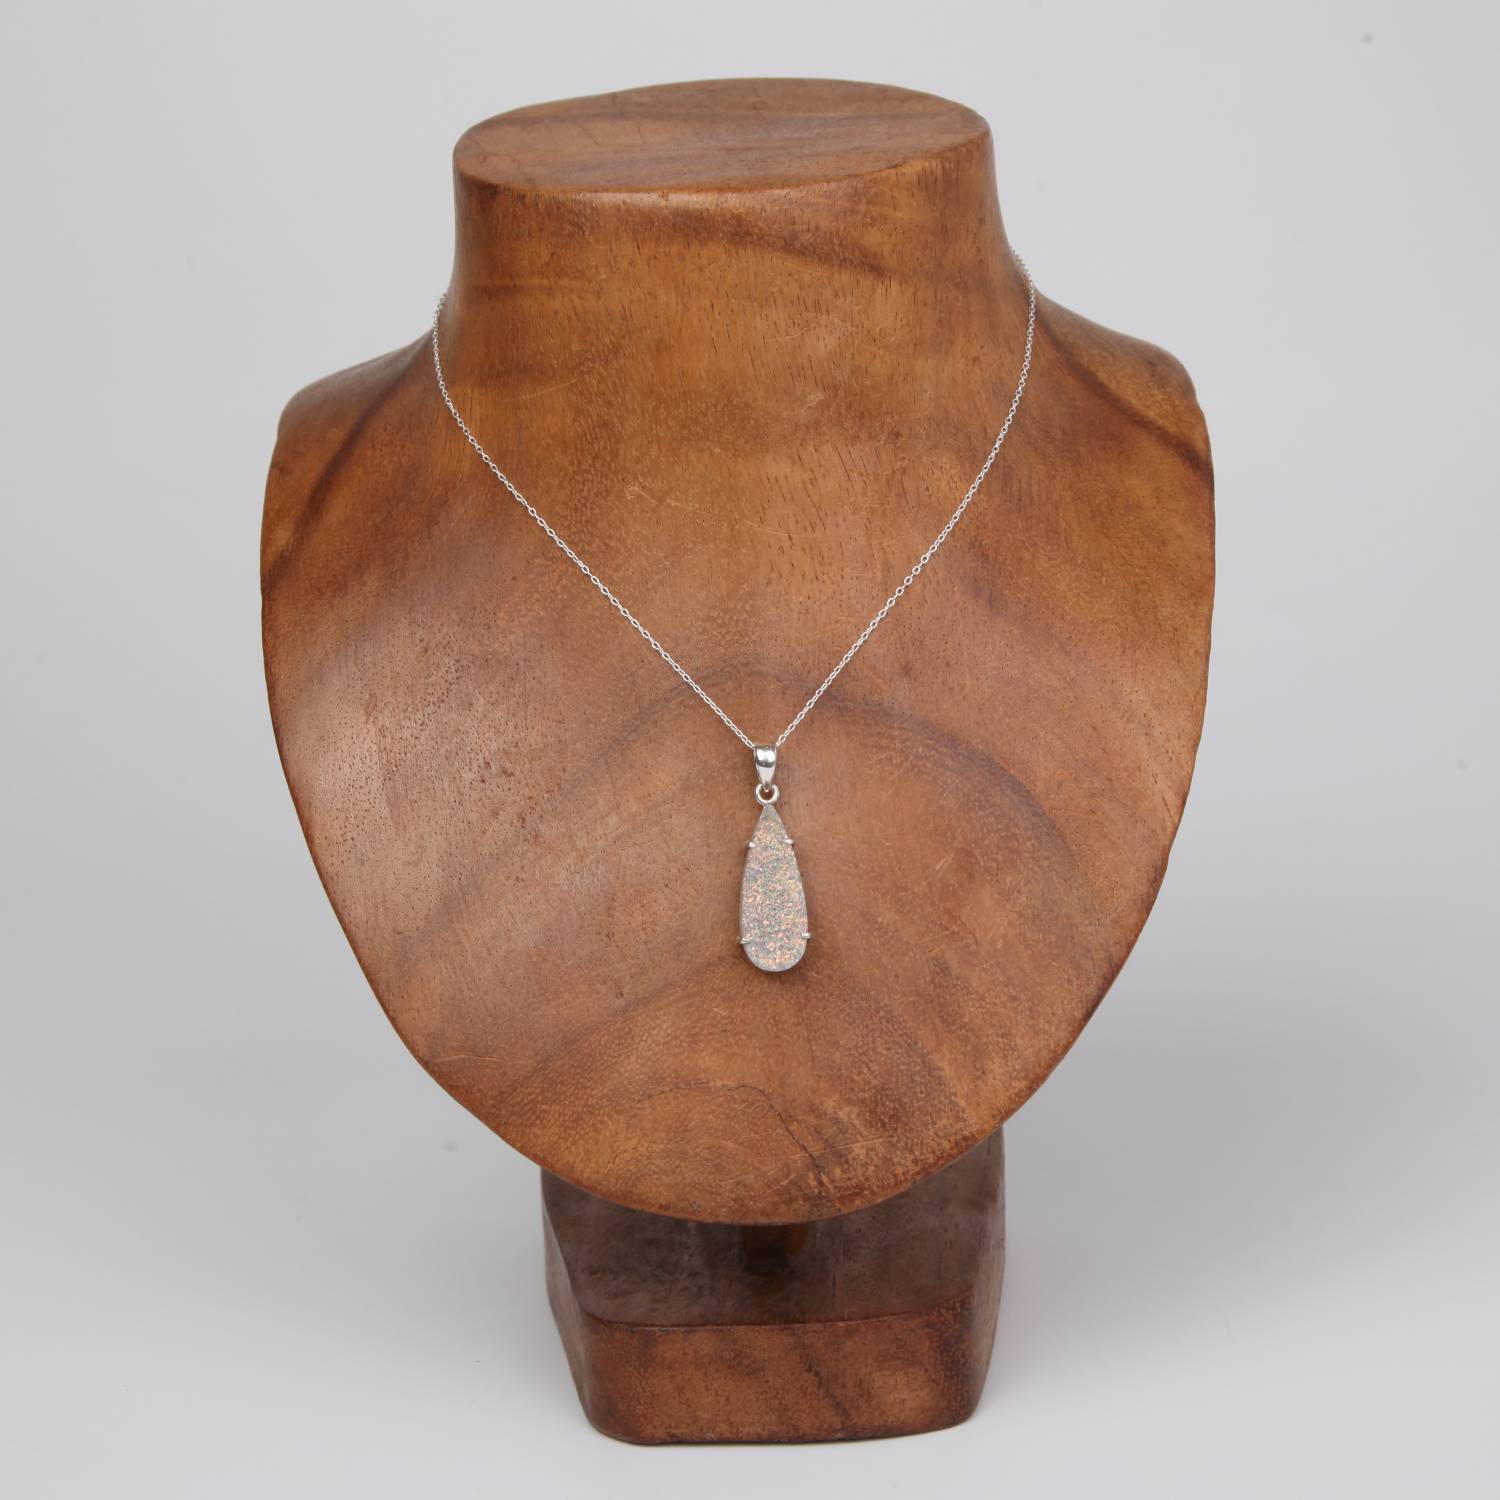 Sterling Silver Pendant with Drusy Quartz